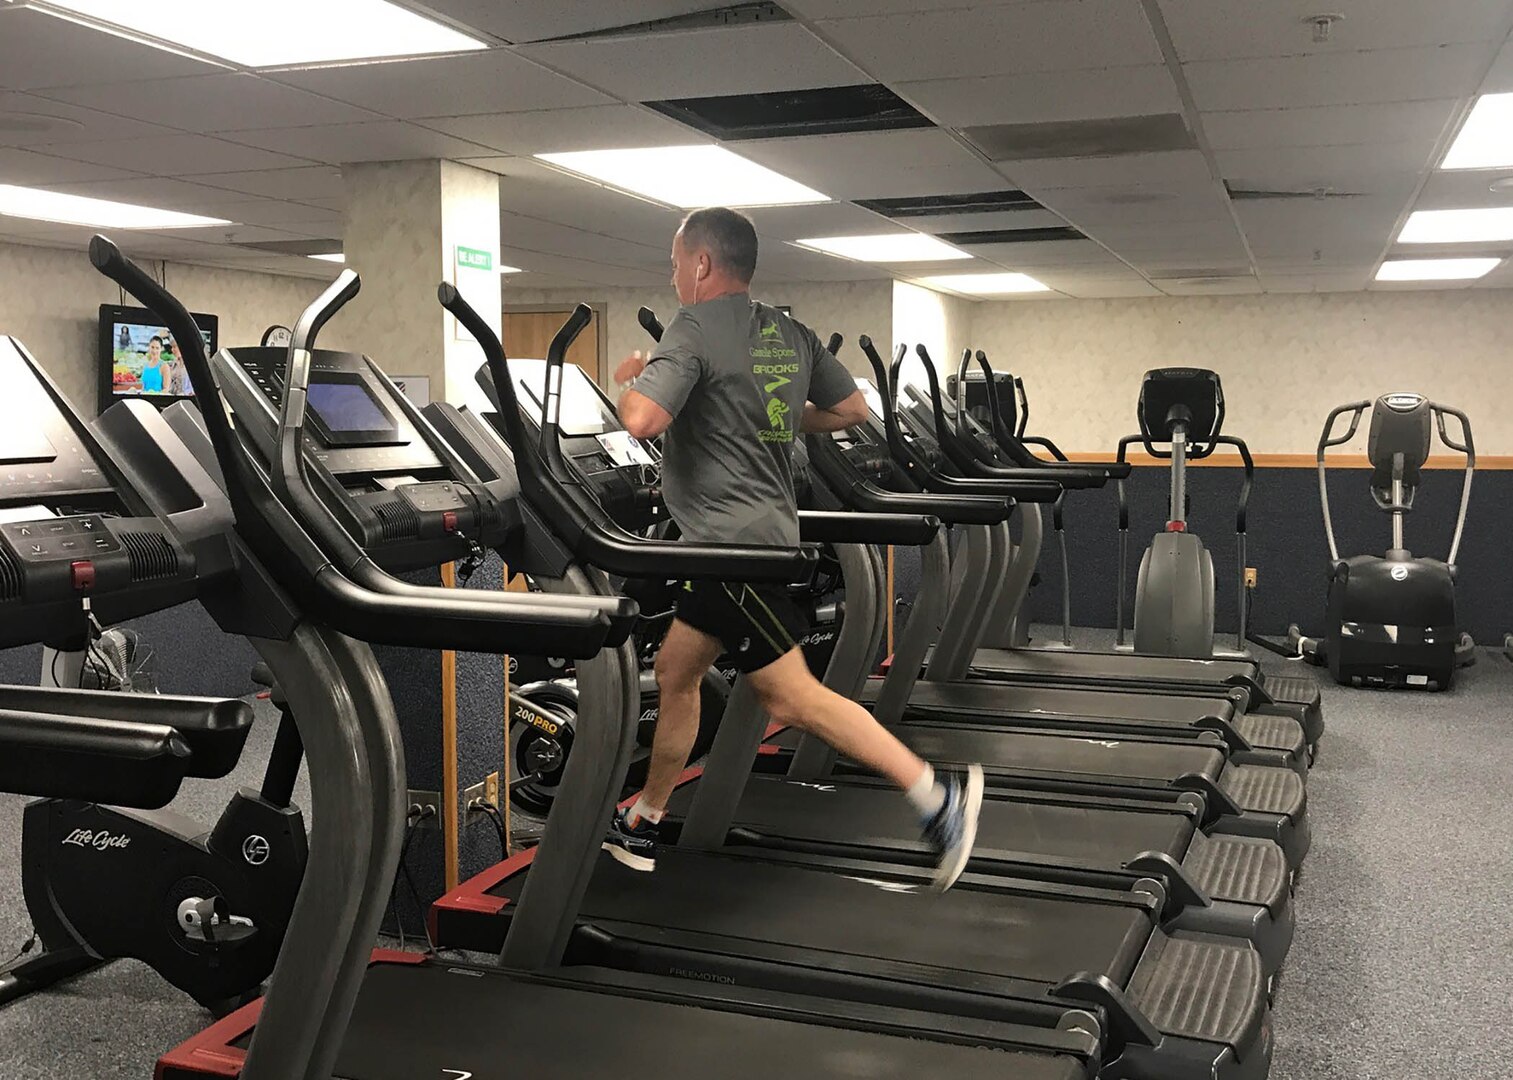 Don Phillips, DLA Installation Support at Battle Creek site director, uses a treadmill in the Federal Center’s Fitness Center to complete his run.